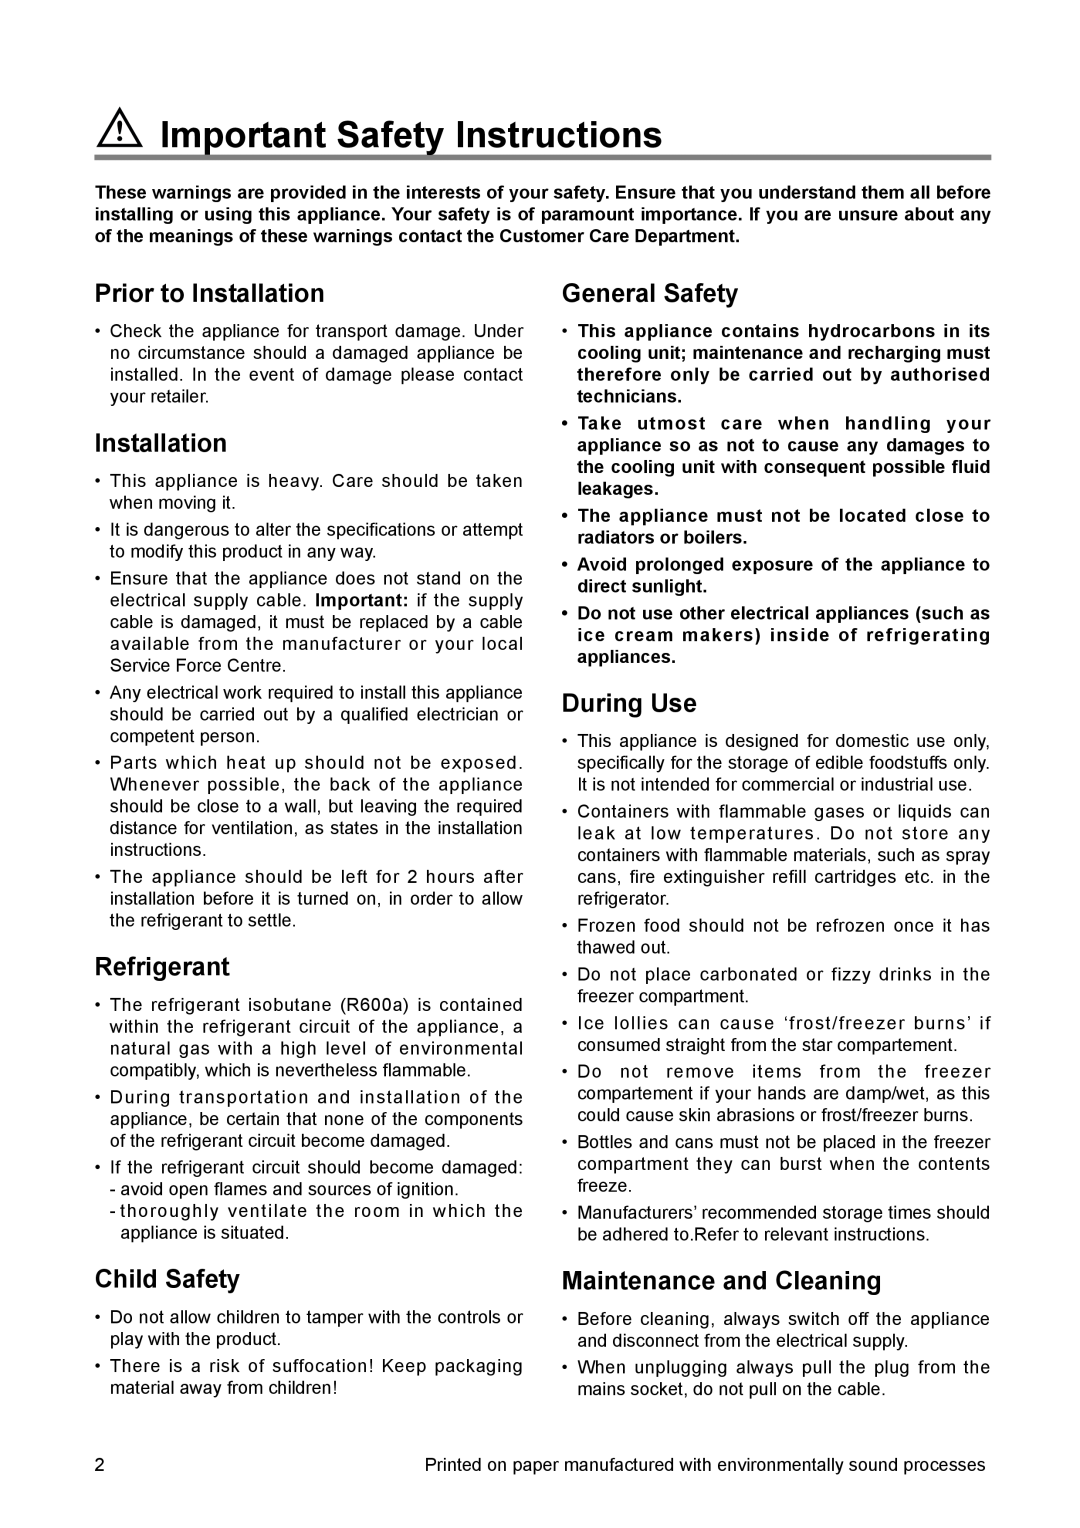 Zanussi ZERT 6675, ZRT 1675 Important Safety Instructions, Prior to Installation, Refrigerant, General Safety, During Use 